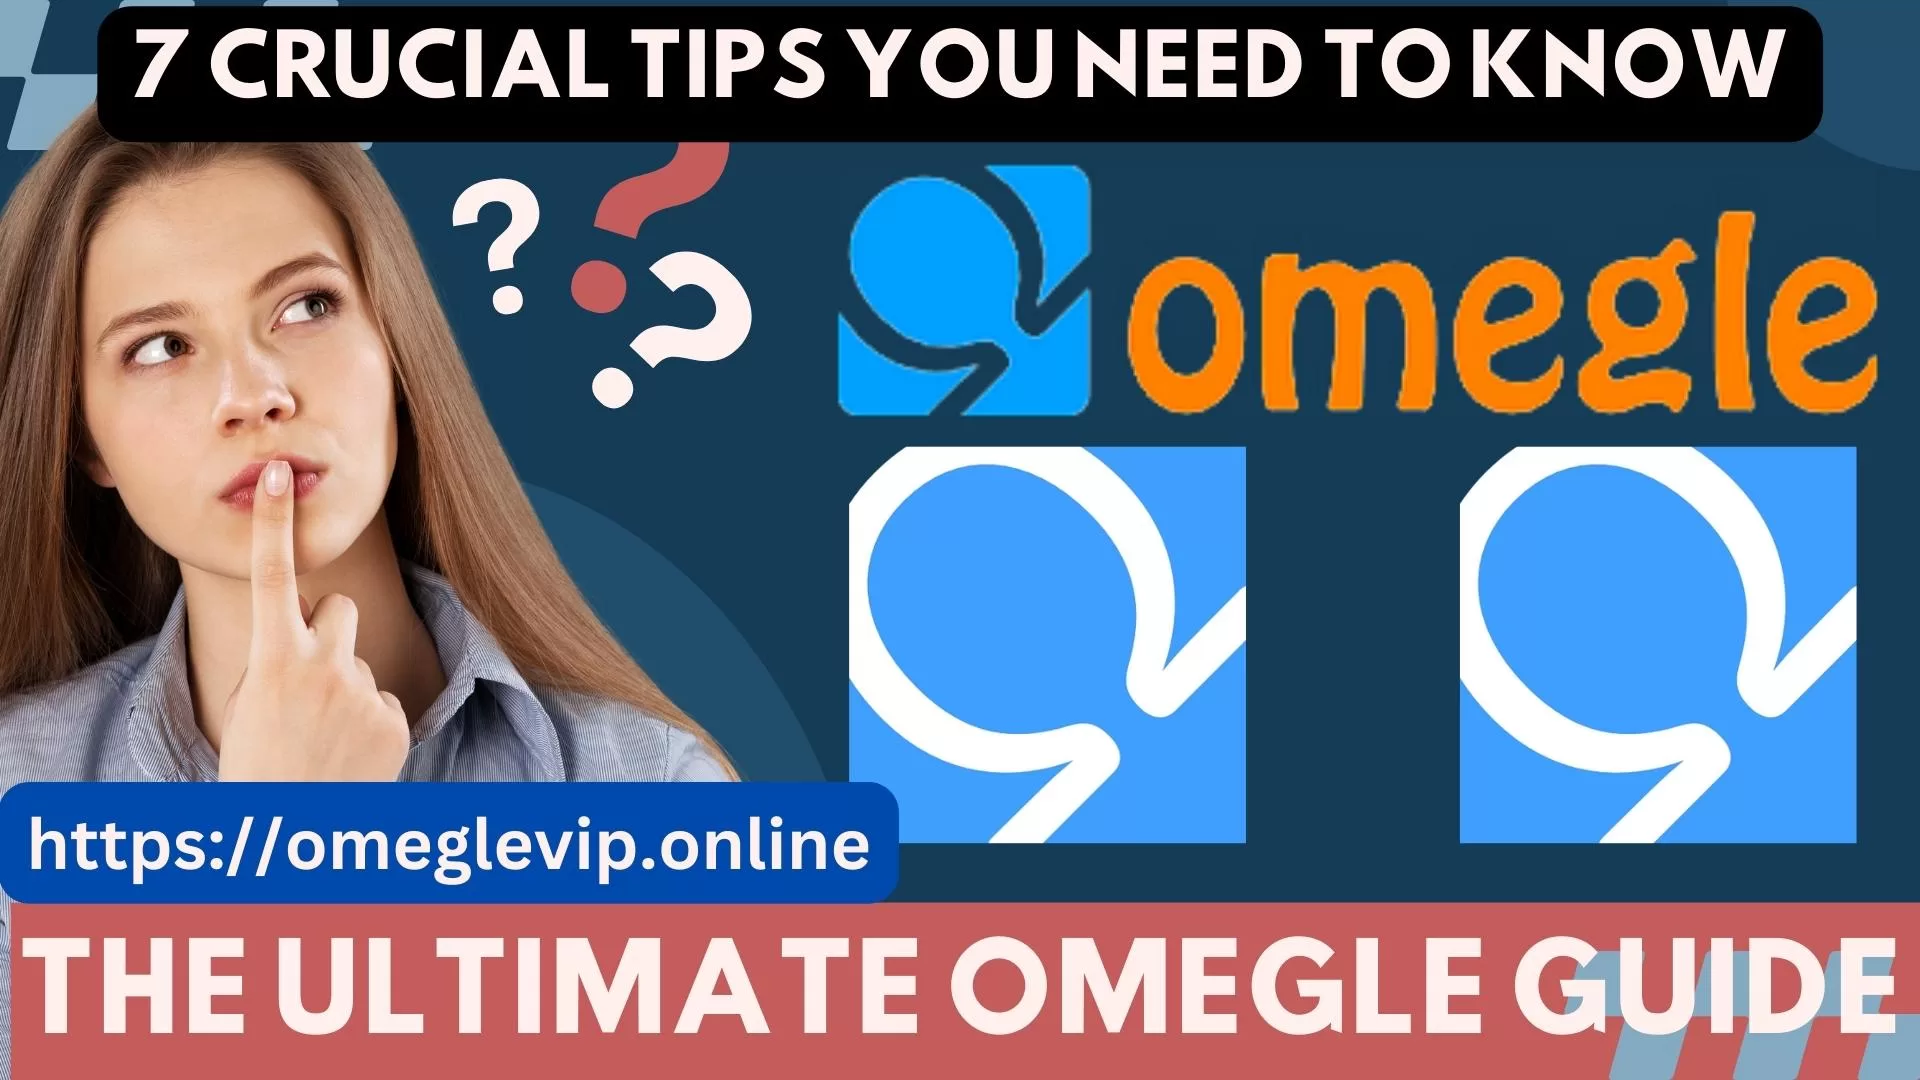 Tips to Use on Omegle